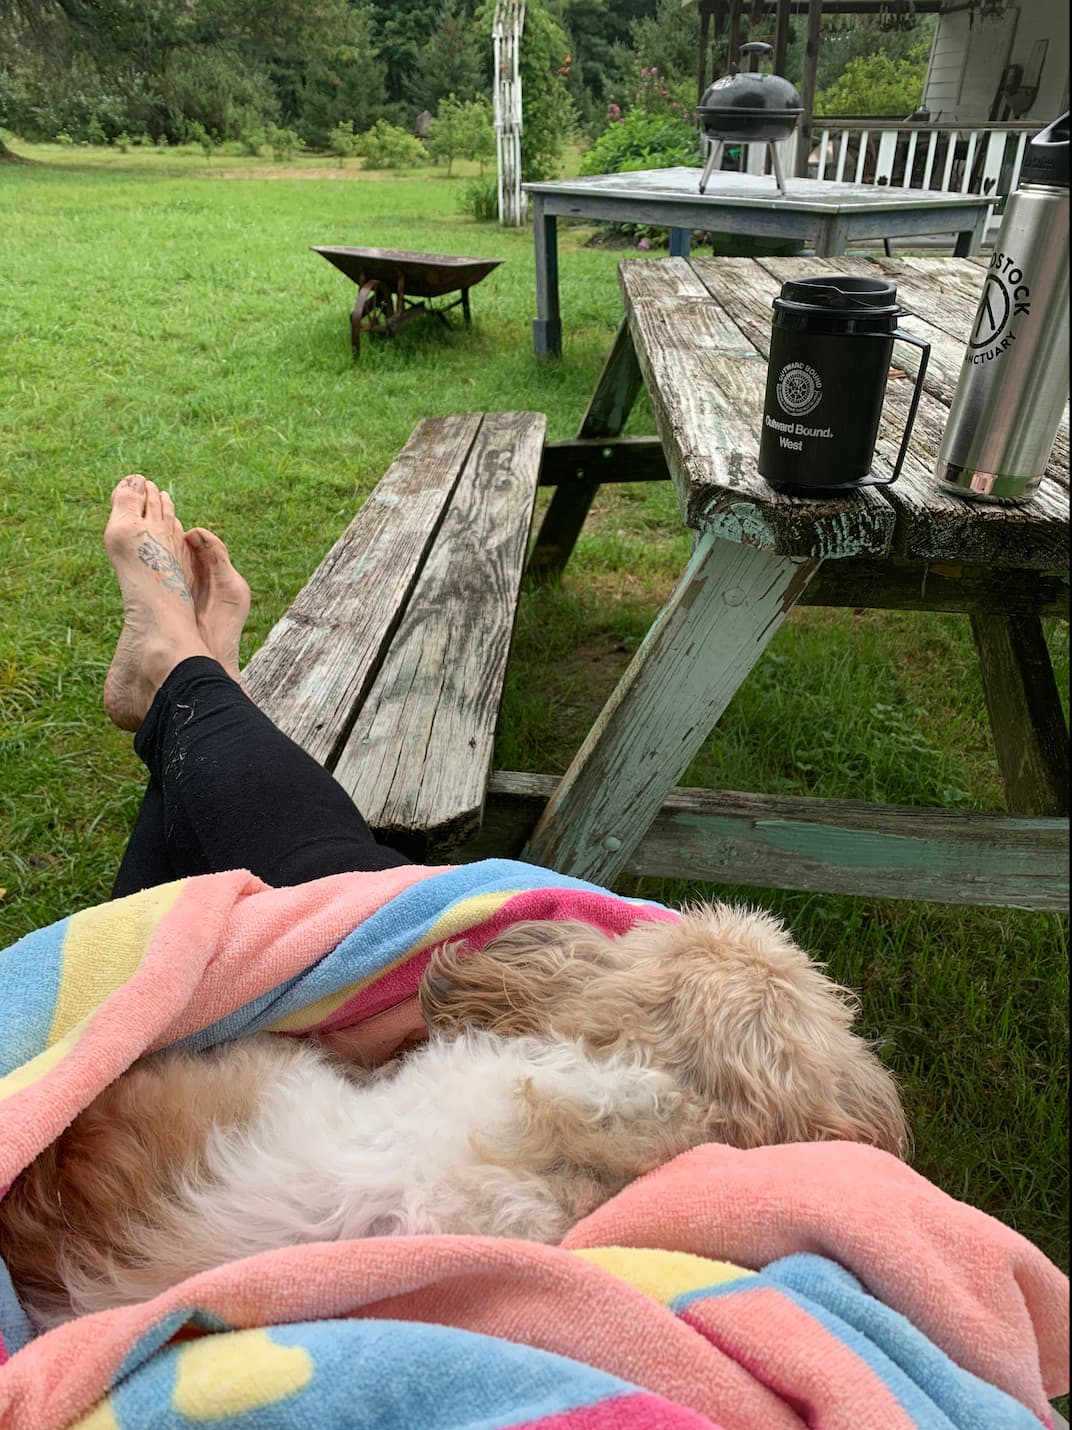 Breakfast coma for "bug", fresh air and quiet for me